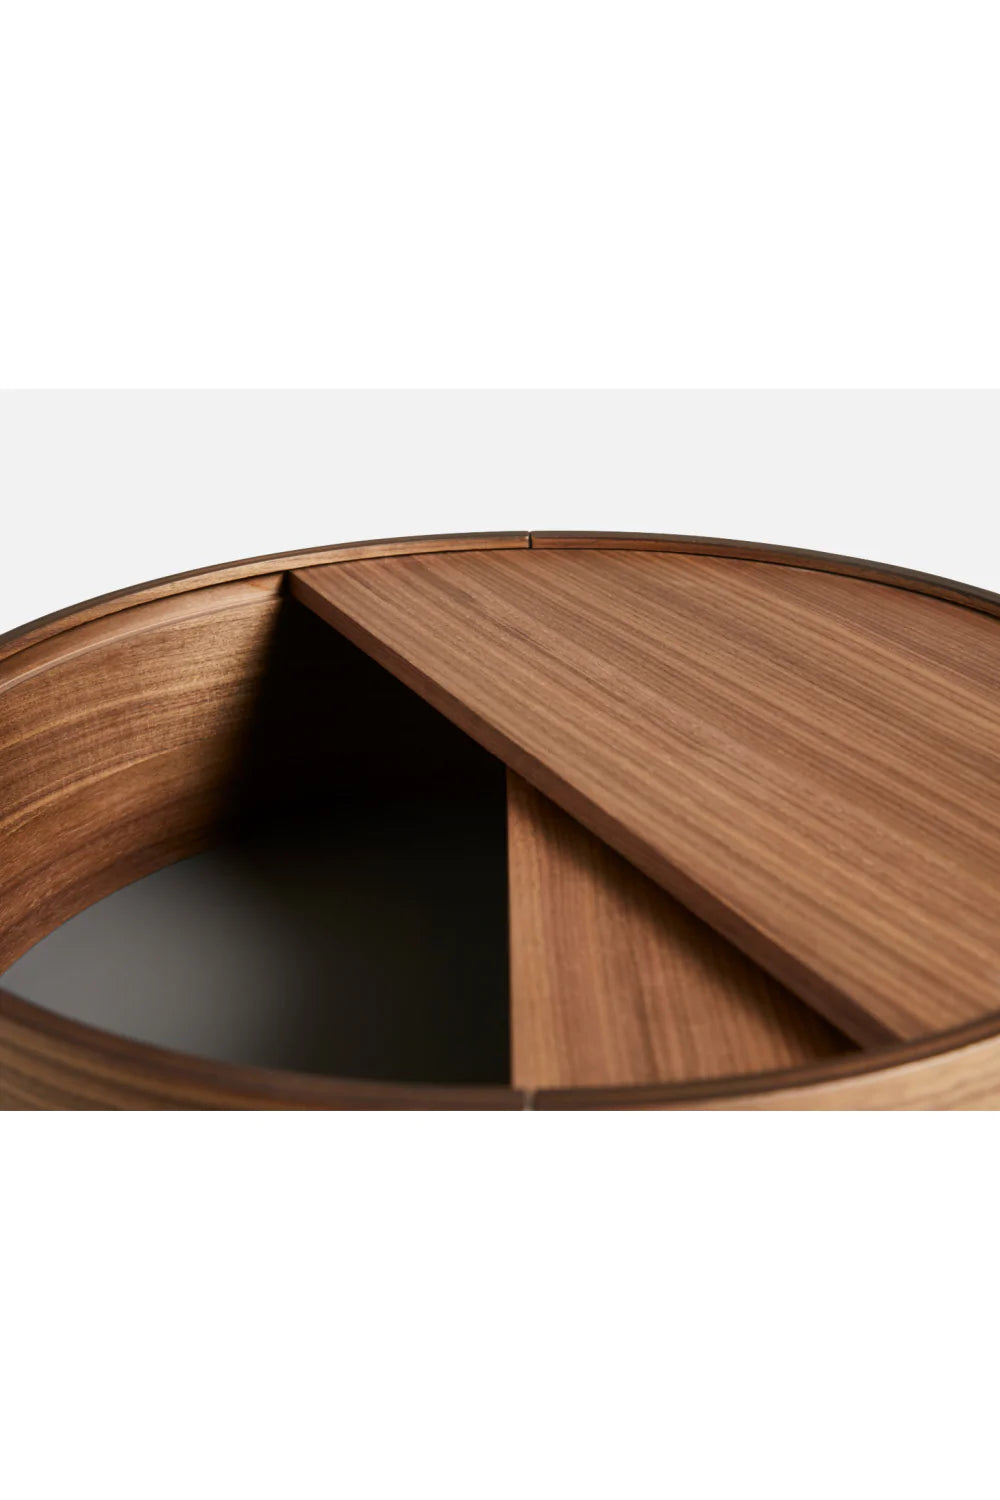 Contemporary Round Side Table | WOUD Arc | Woodfurniture.com